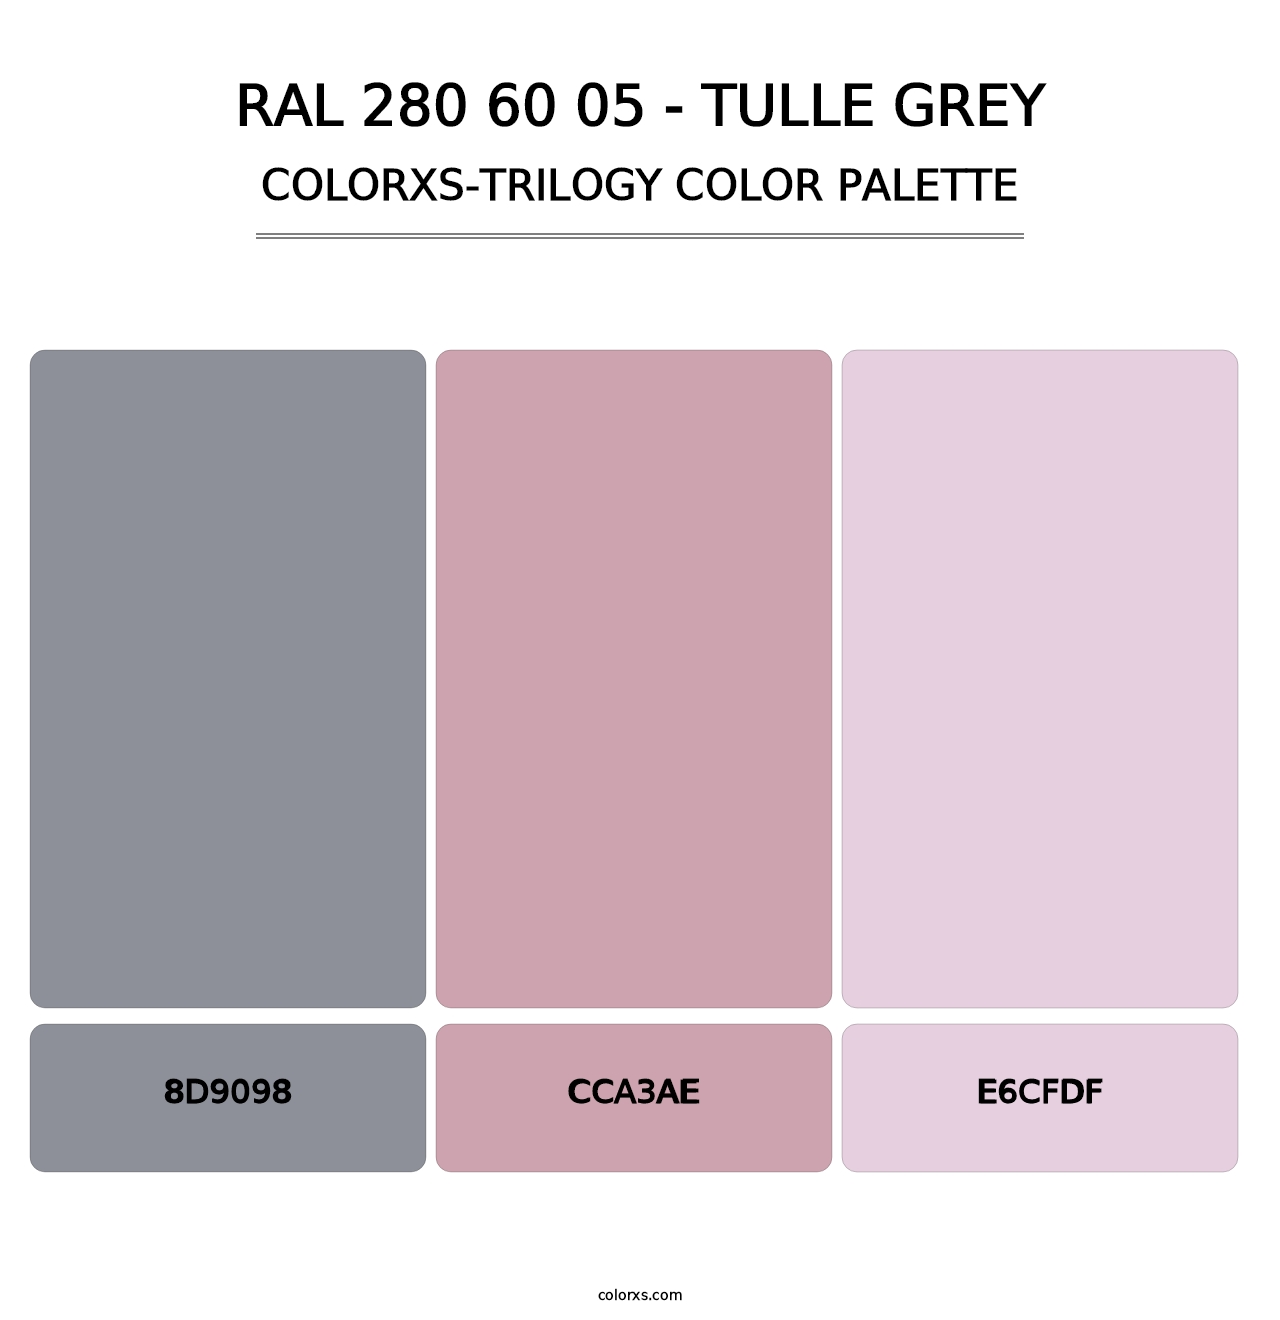 RAL 280 60 05 - Tulle Grey - Colorxs Trilogy Palette